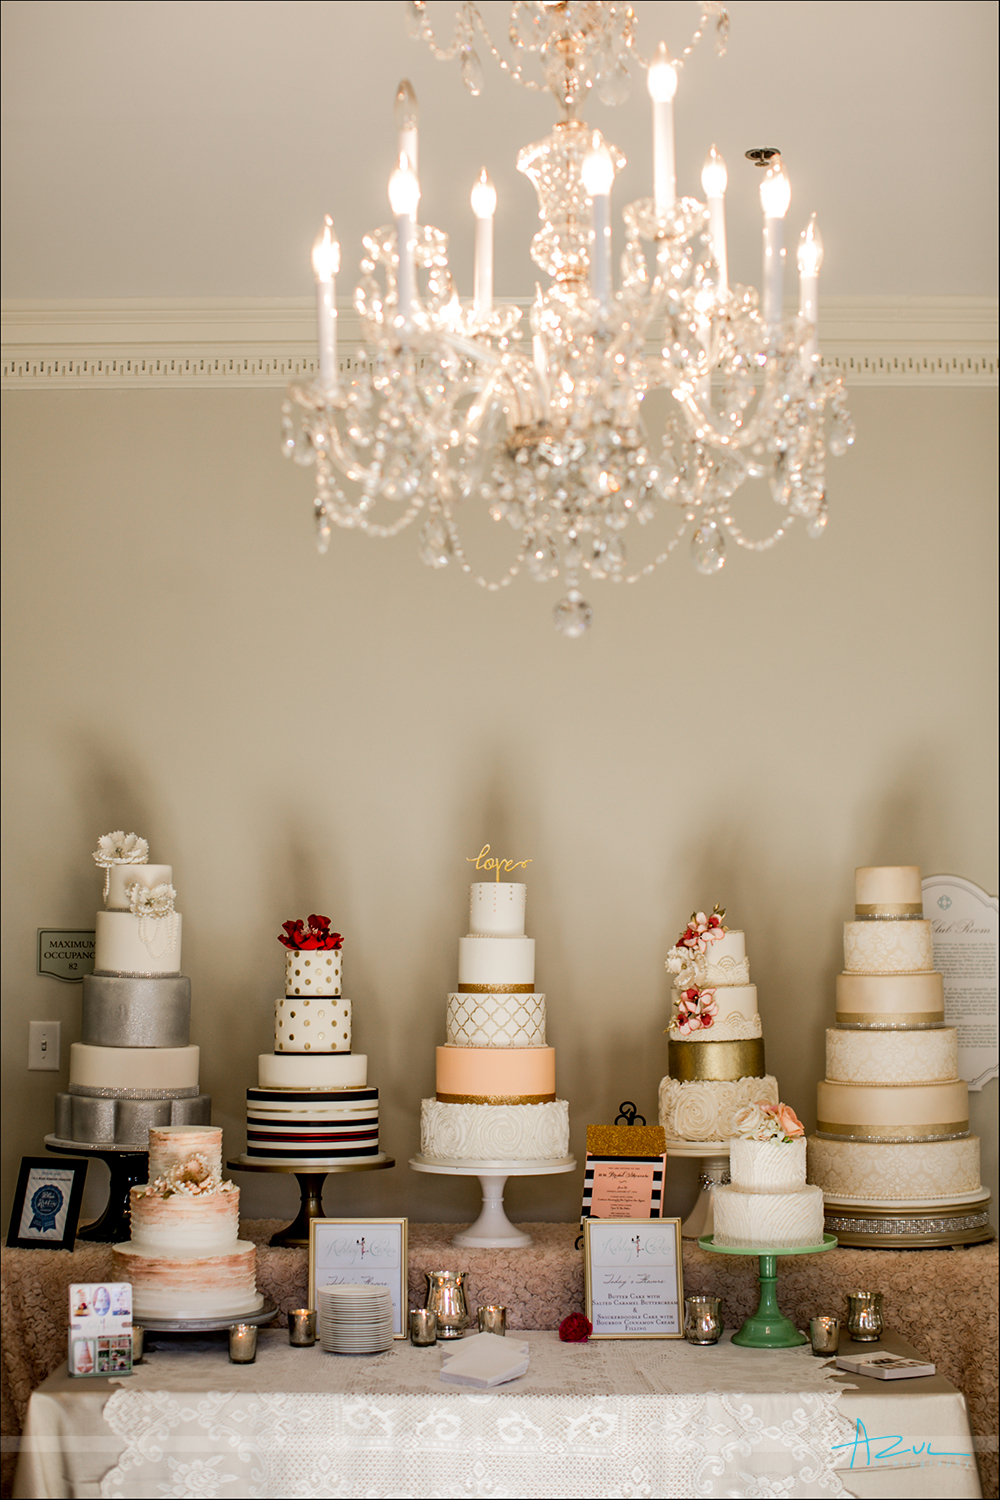 Best wedding day cakes Ashley Cakes Raleigh, NC